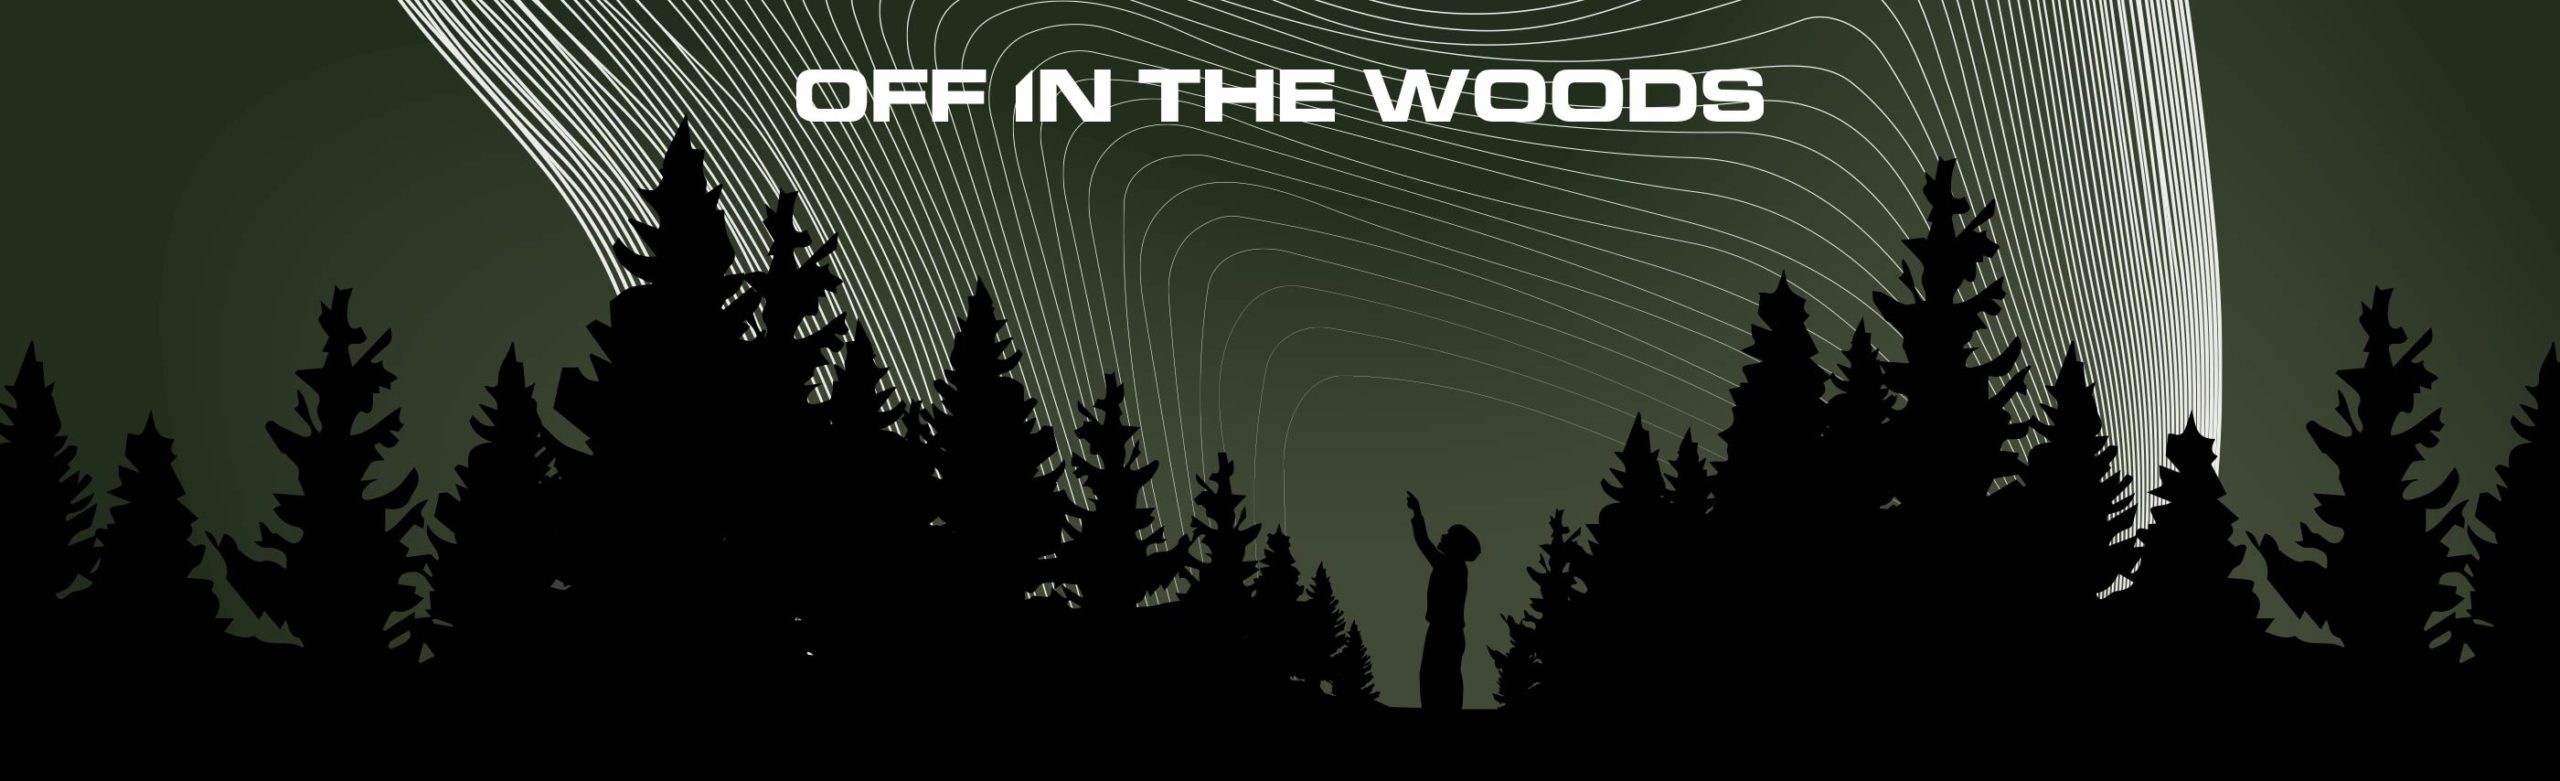 Missoula’s Off In The Woods Announce Free First Friday Show at the Top Hat Image